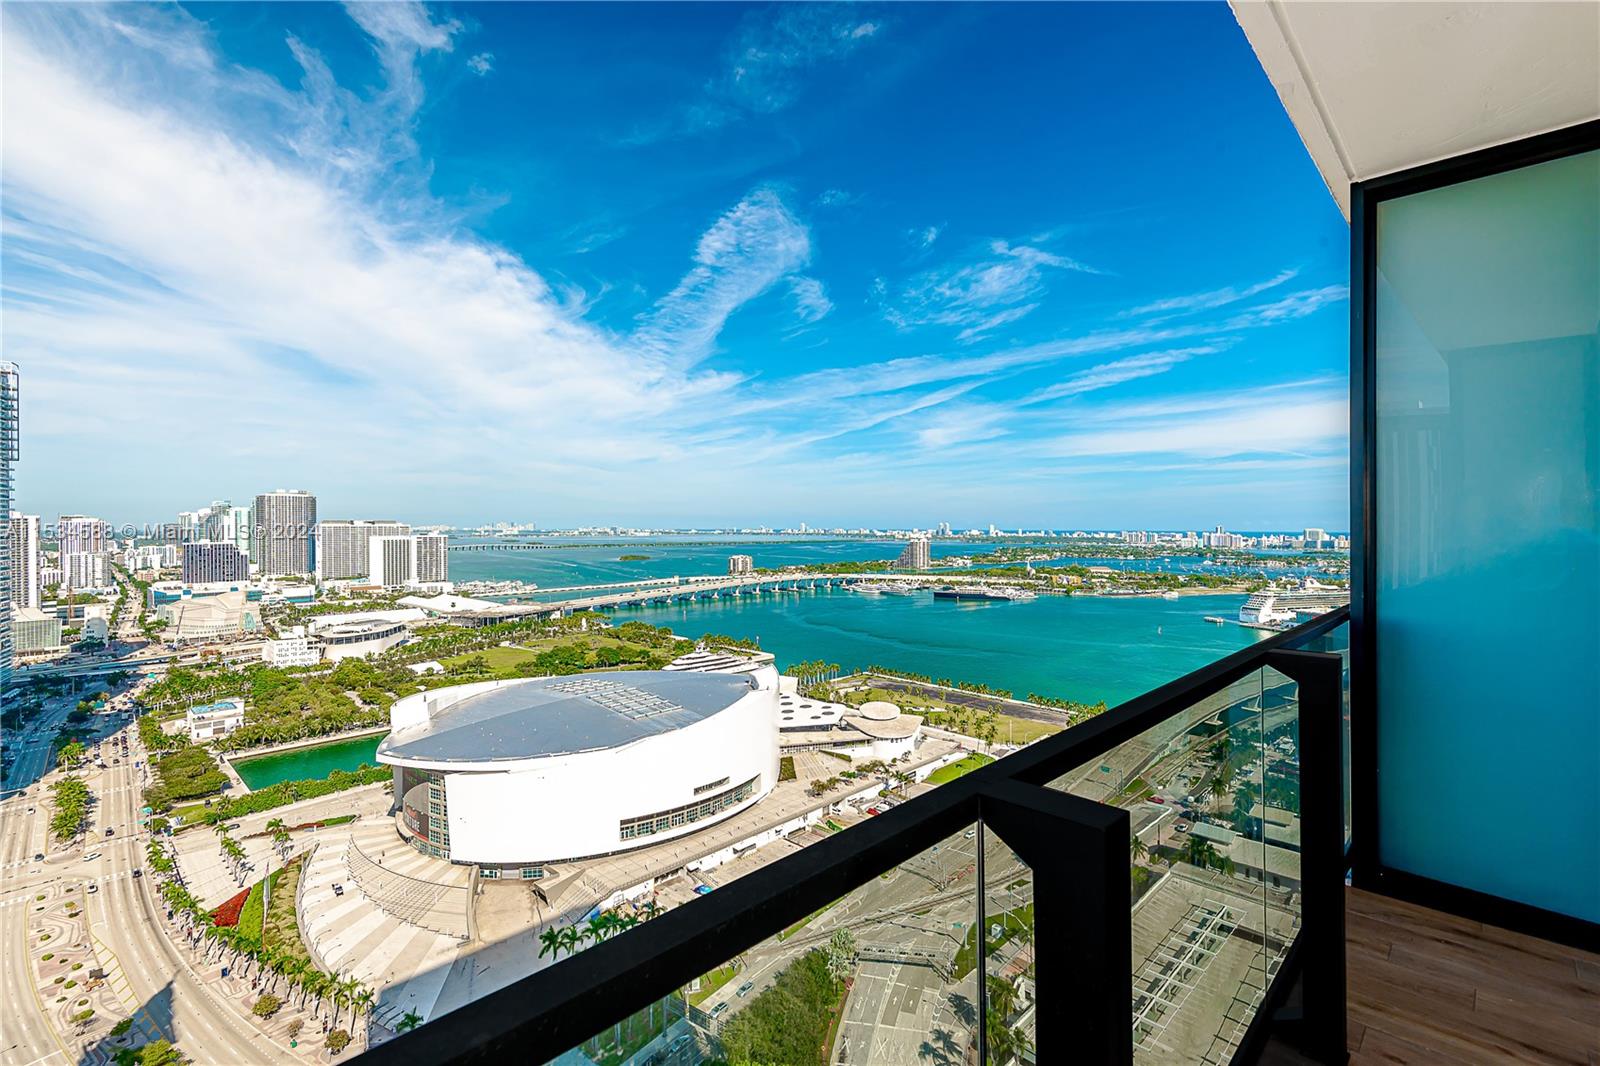 Indulge in luxury living with panoramic views of Biscayne Bay and Downtown Miami in this exquisite 496 sqft studio with no rental restrictions. Fully furnished, it includes a full kitchen, king-size bed, pull-out couch, washer/dryer, and a large flat-screen TV. Revel in amenities like a wraparound pool, two-story gym, valet parking, and more. Situated near Kaseya Center, Bayside Marketplace, major roads, Port of Miami, Brightline train station, and public parks, this condo epitomizes convenience and comfort.